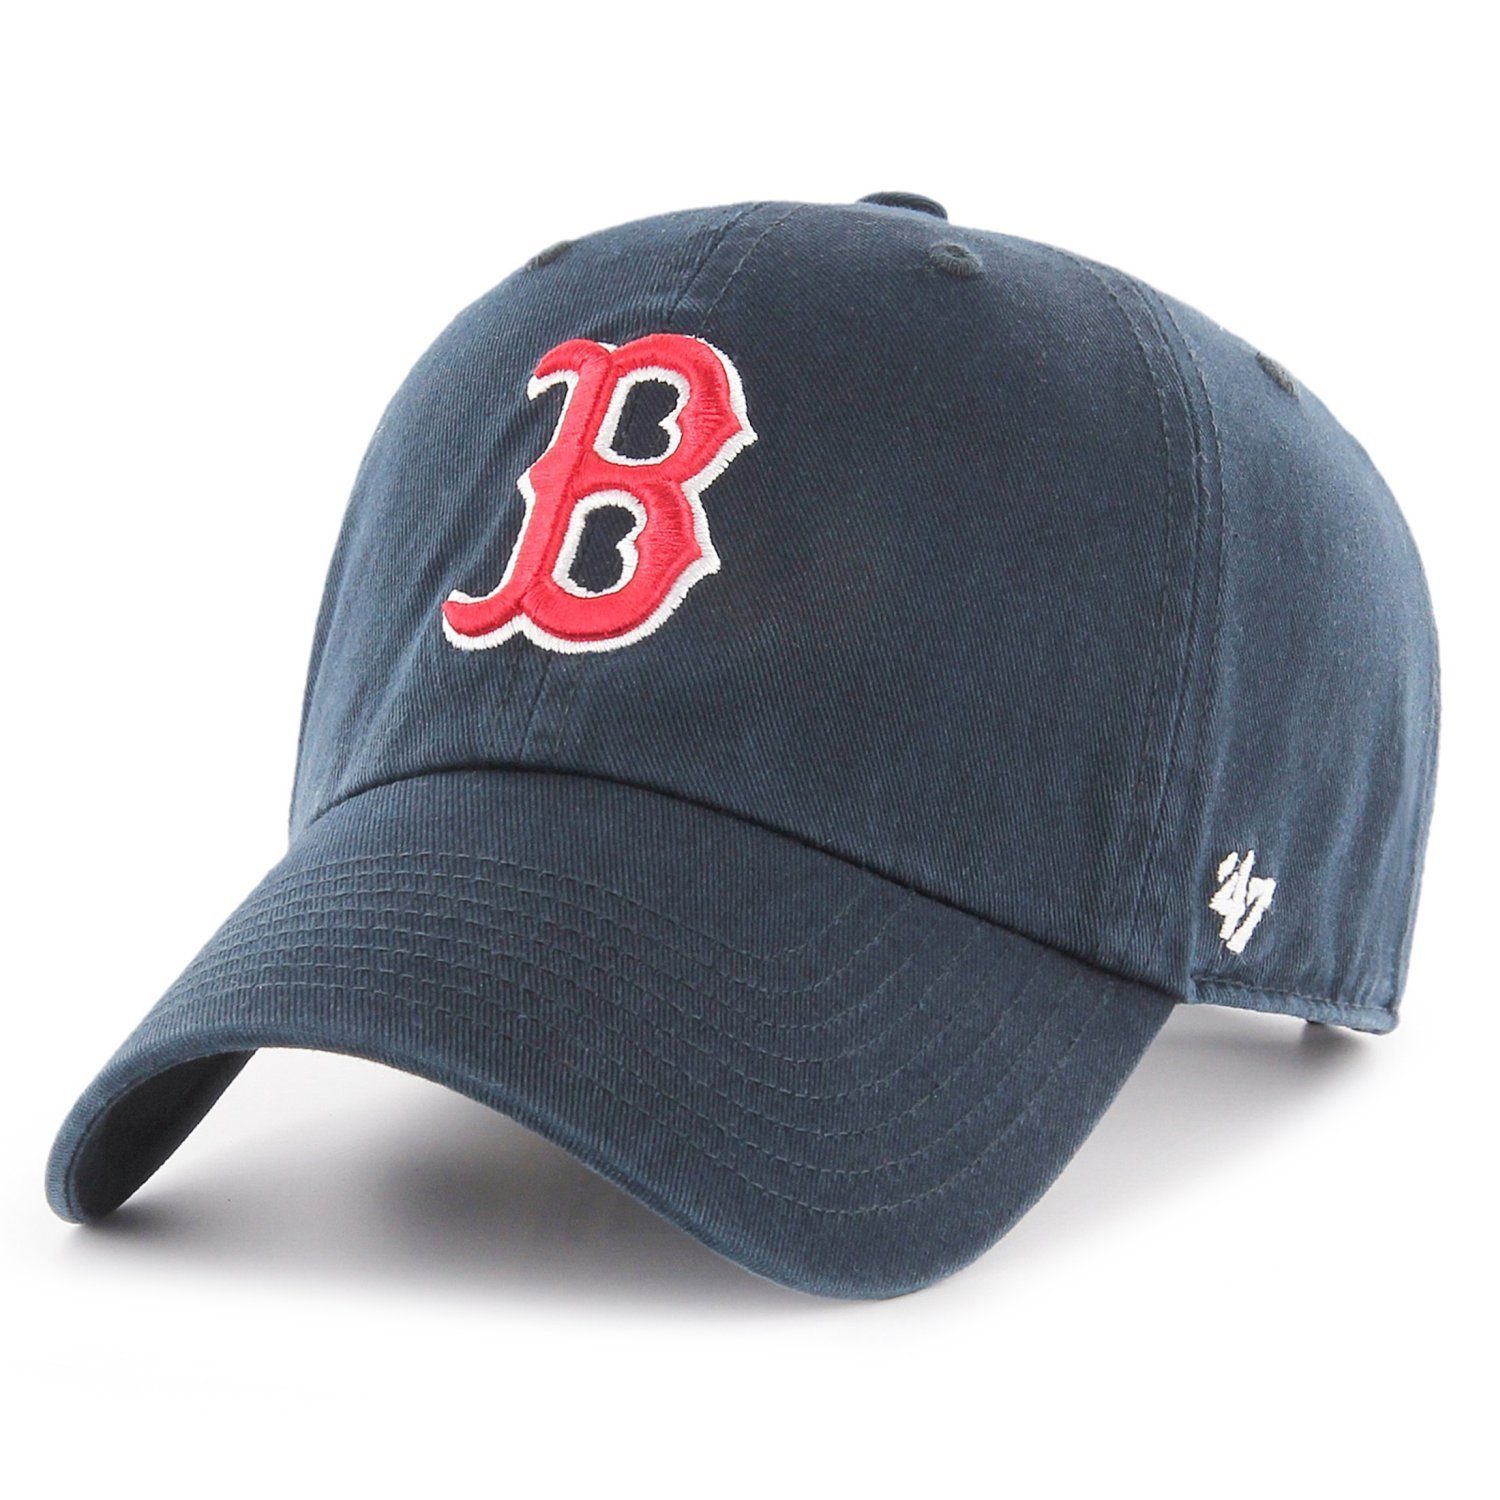 x27;47 Brand Trucker Cap Sox Red Relaxed Boston Fit MLB